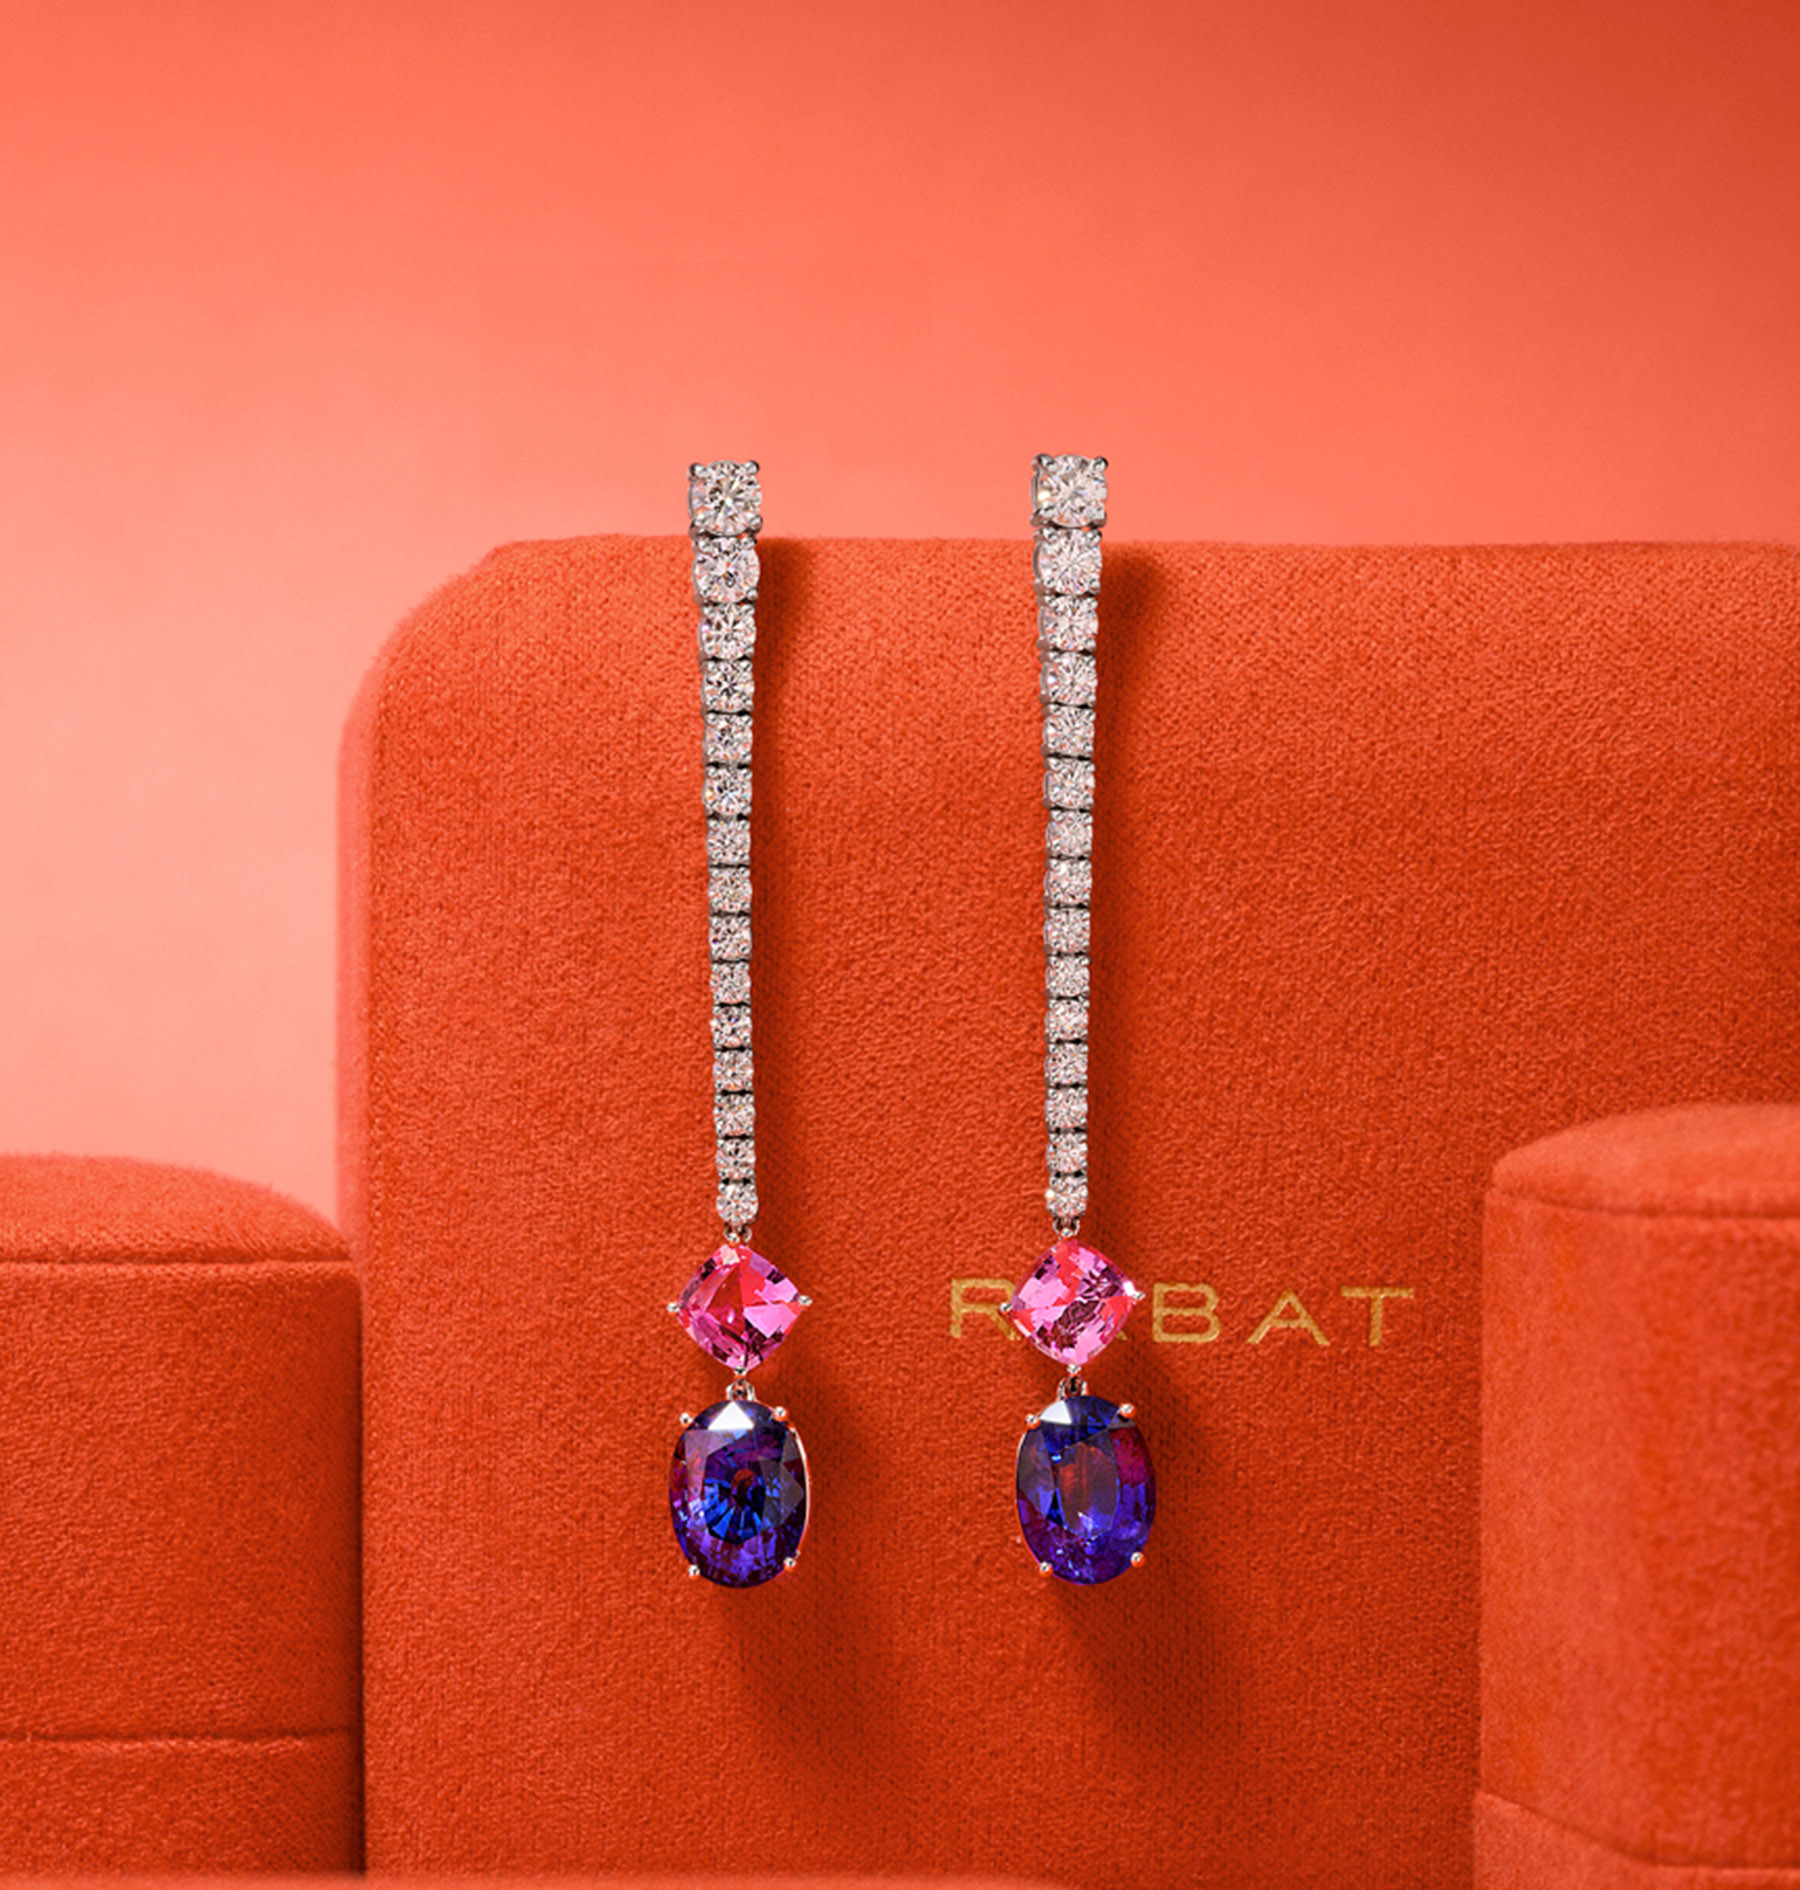 Precious Stones Jewels Collection at RABAT Jewelry